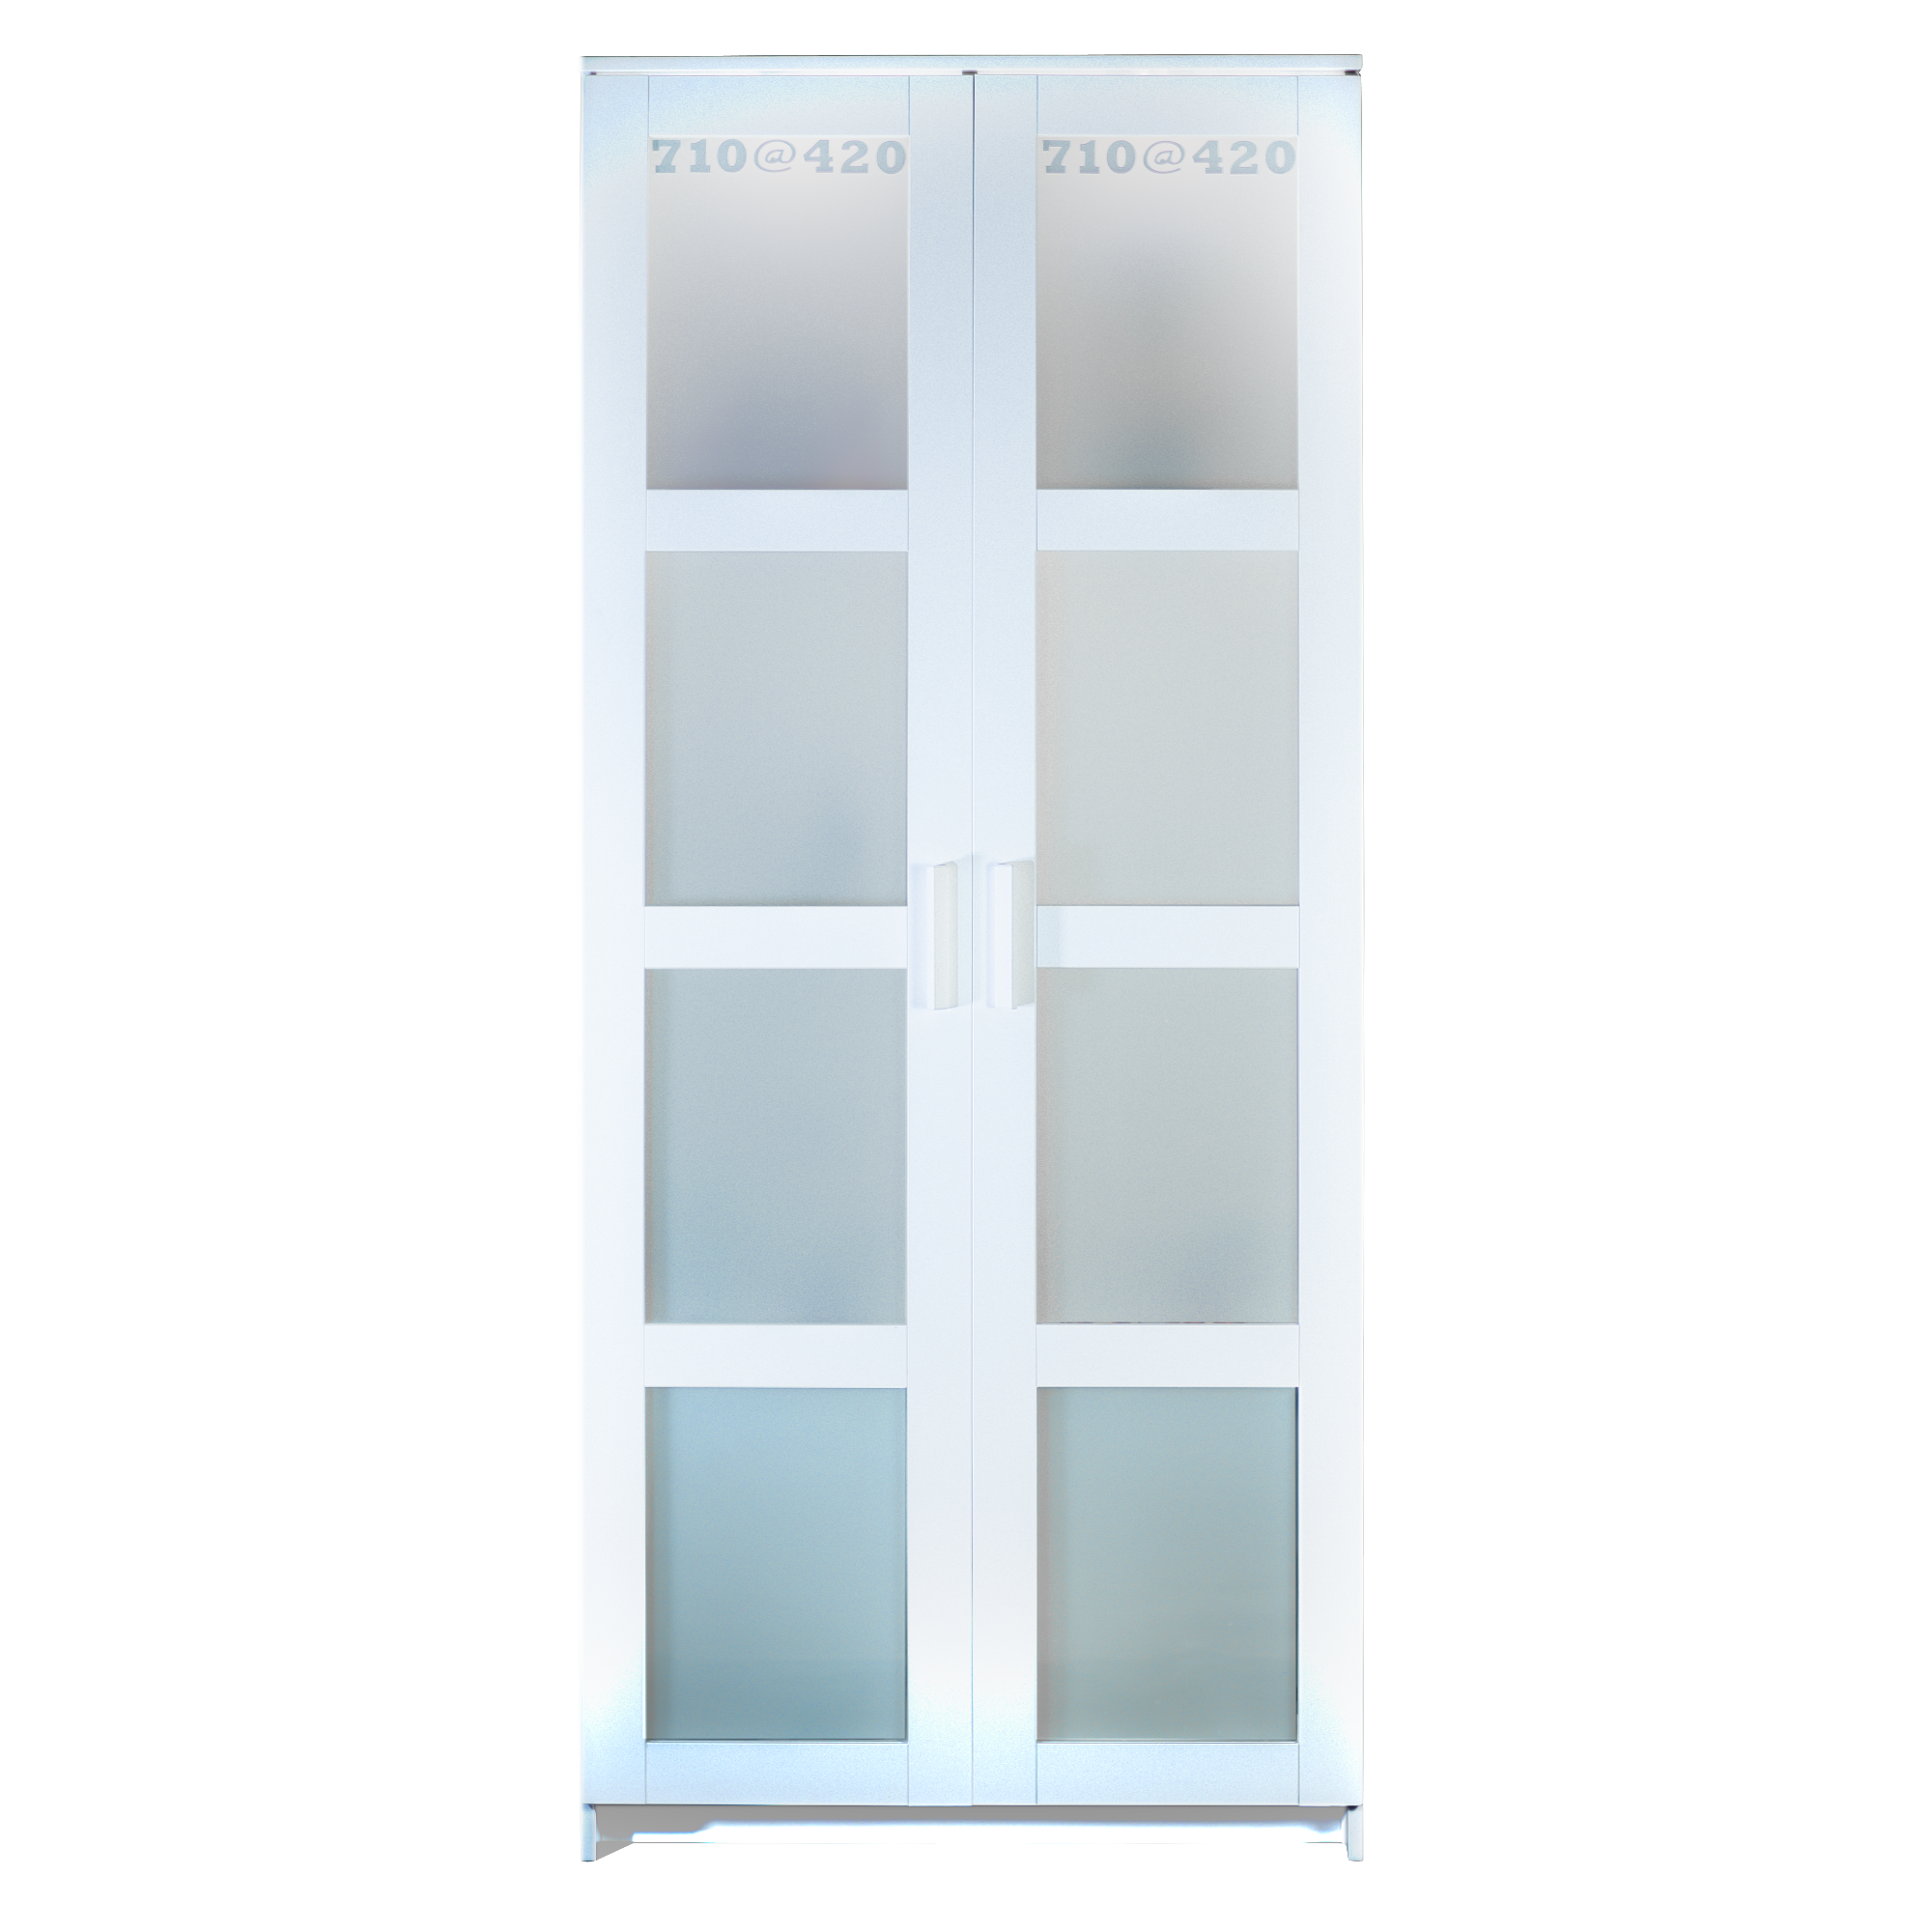 (product) Self Frosting / Defrosting 710@420 Smart Glass Display Cabinet